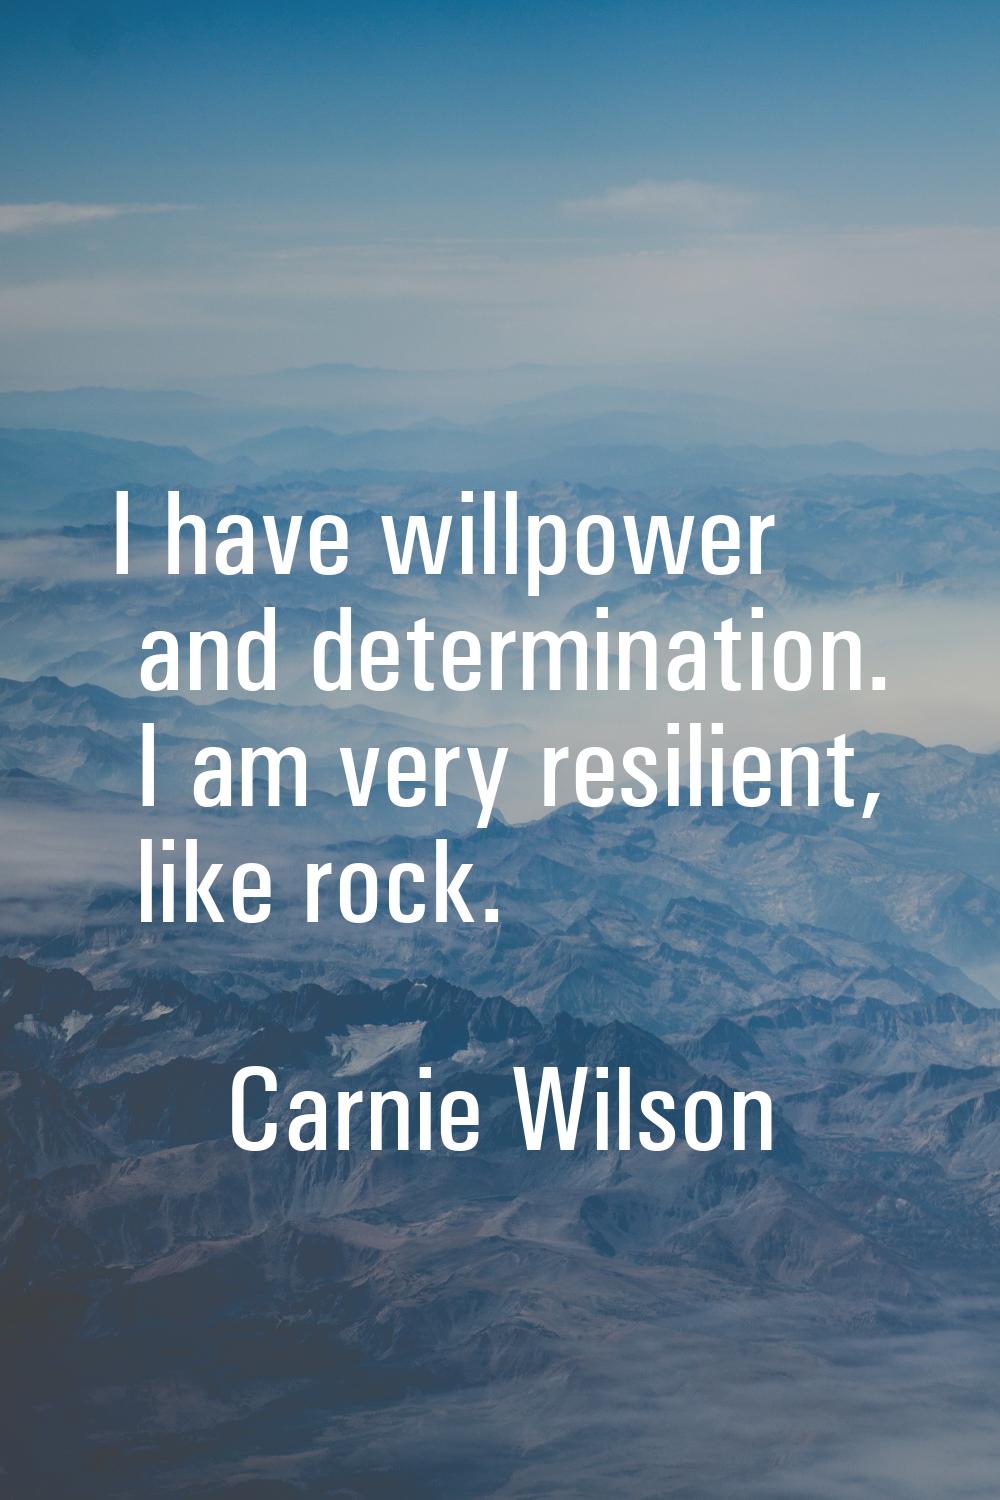 I have willpower and determination. I am very resilient, like rock.